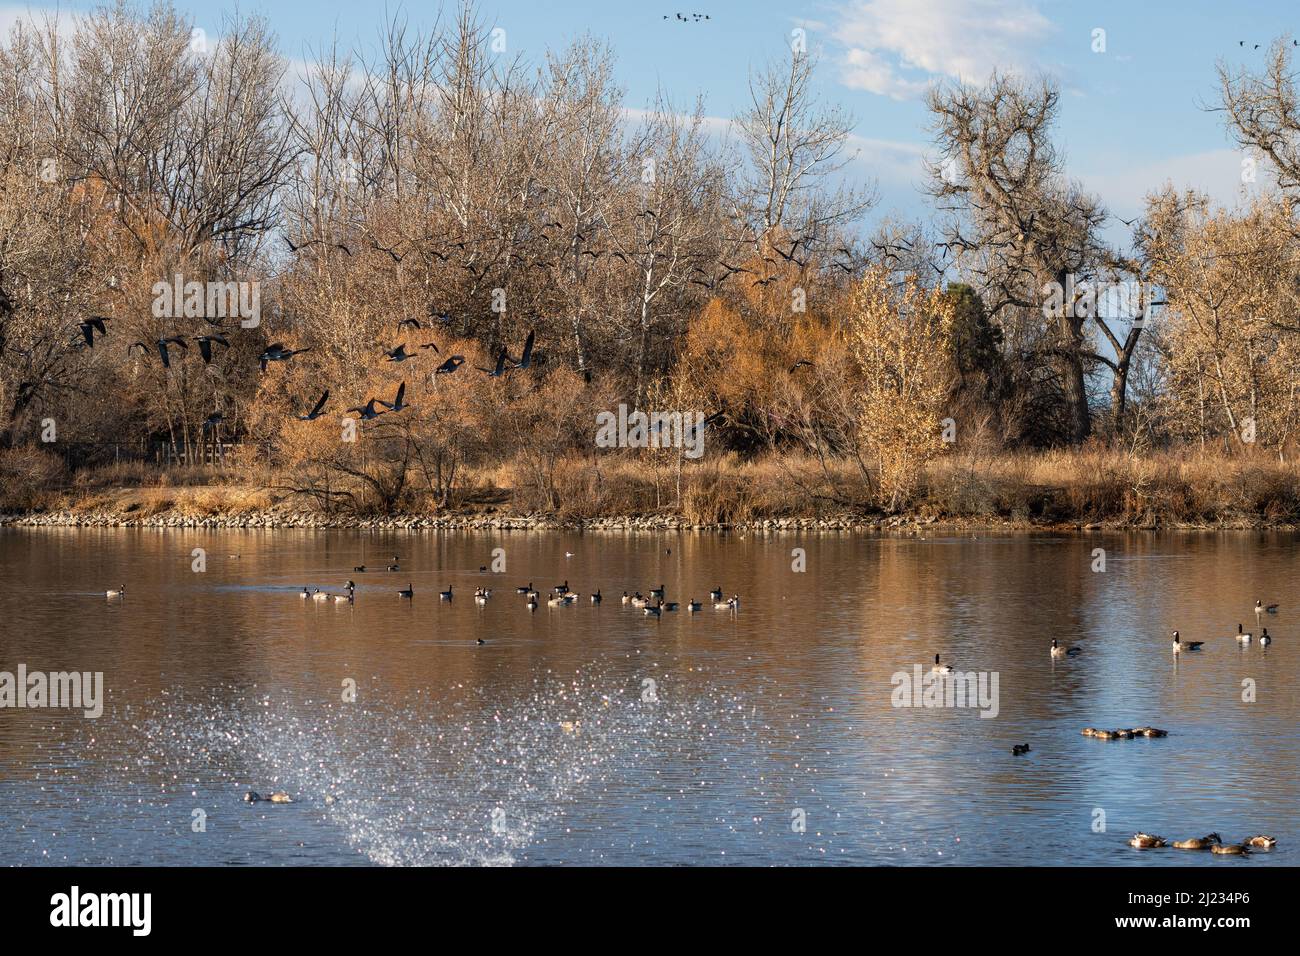 Late Fall at Ketring Park, in Littleton, Colorado, with Geese flying through the tall trees of the landscape and a large lake with a water fountain. Stock Photo